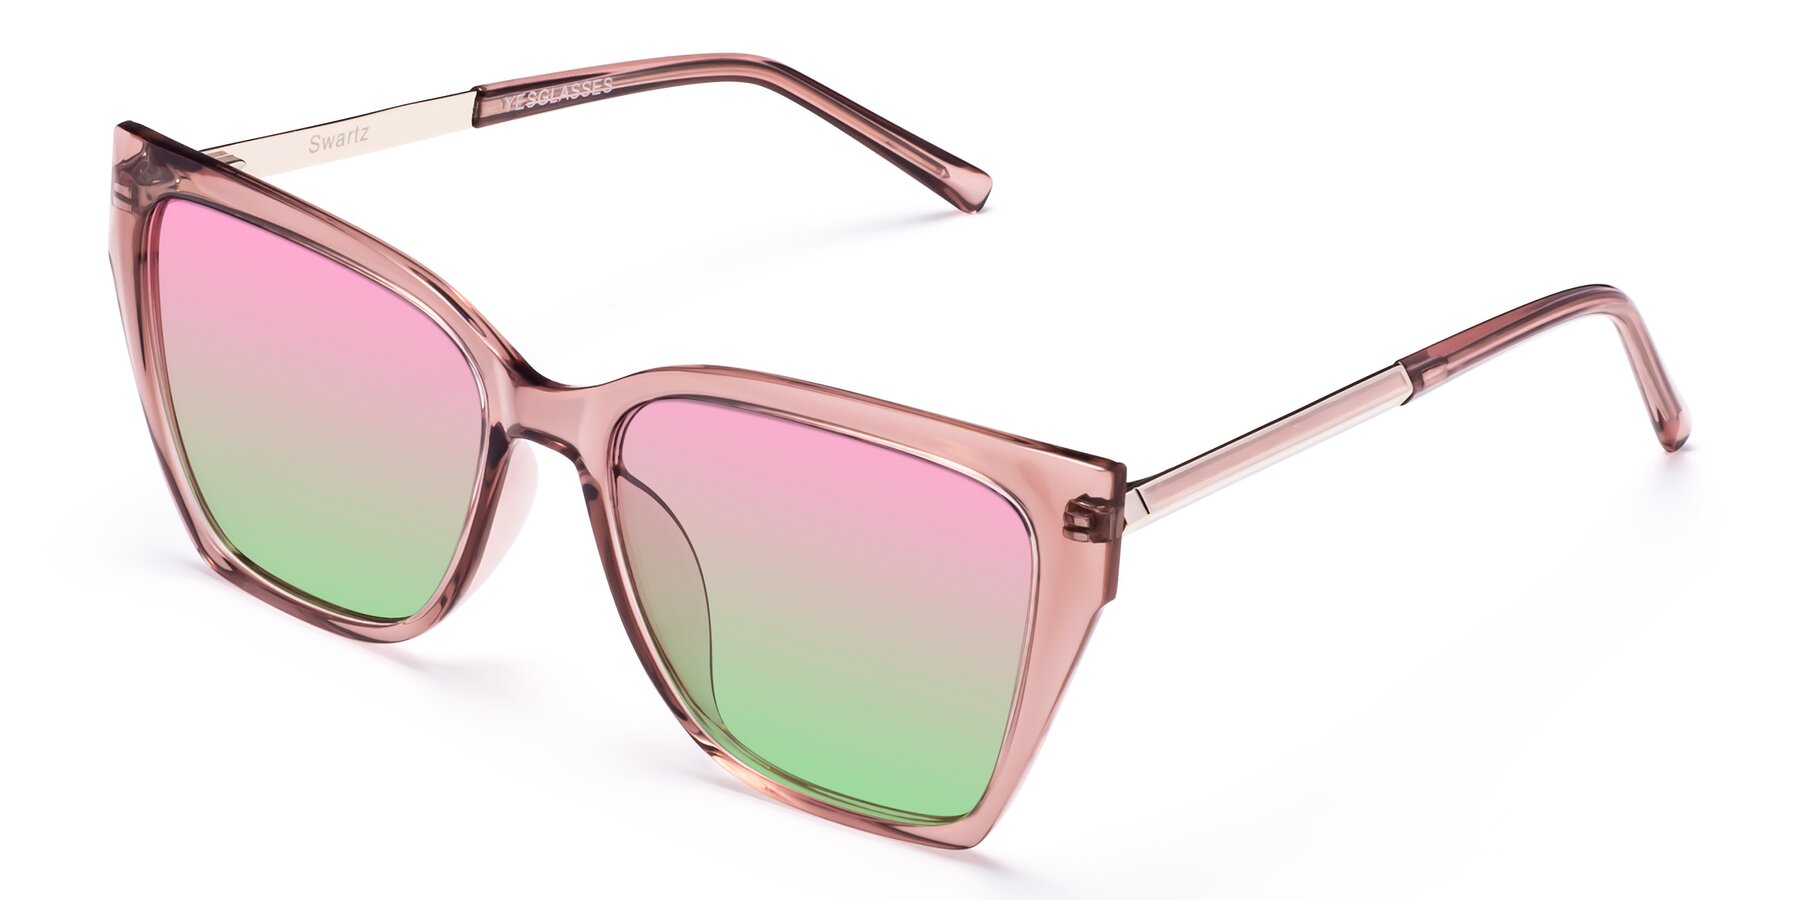 Angle of Swartz in Grape with Pink / Green Gradient Lenses